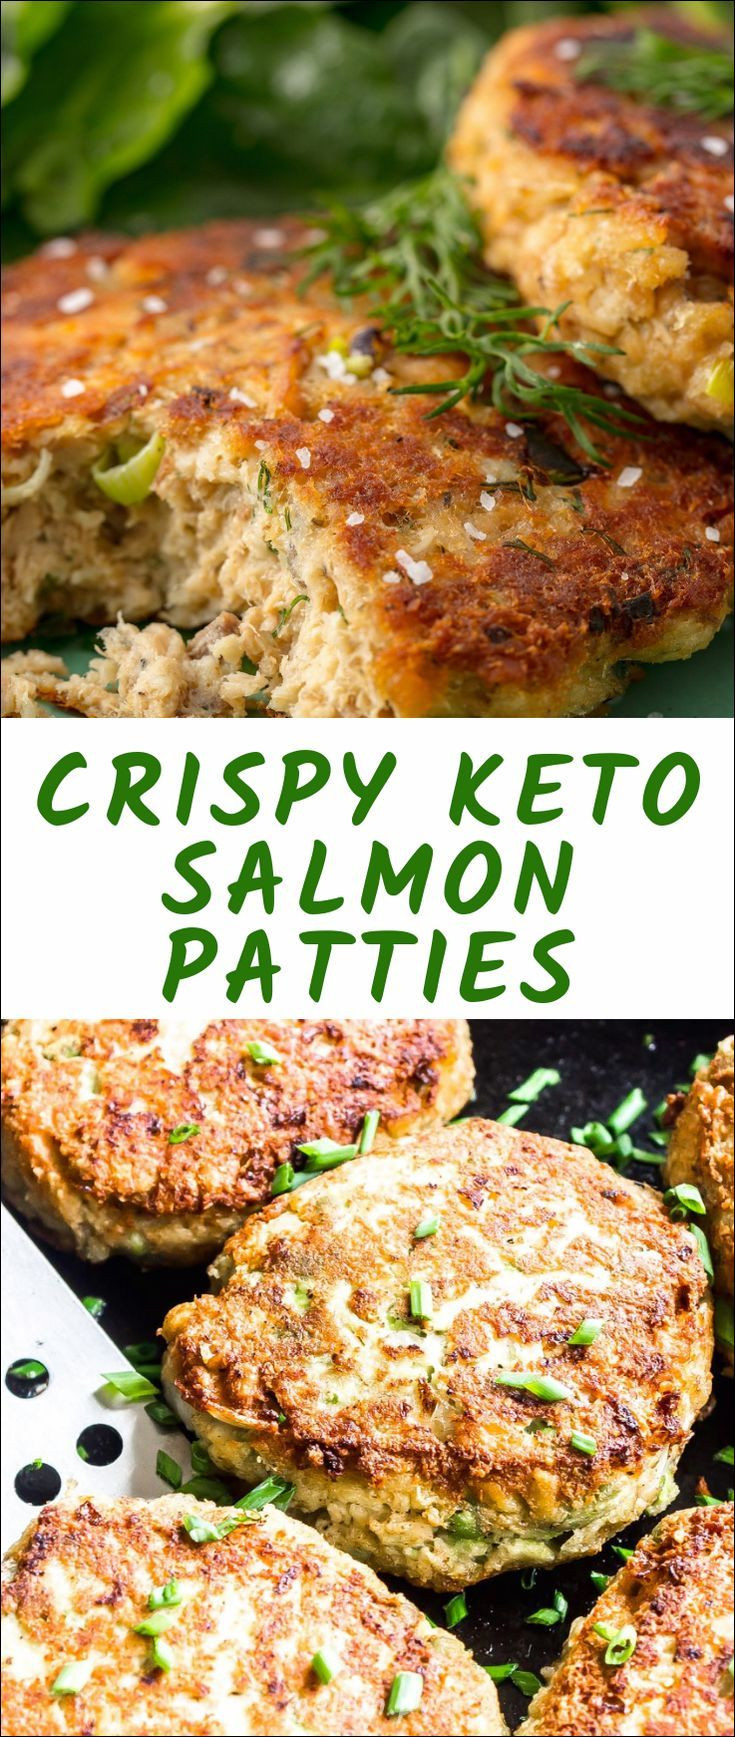 Canned Salmon Keto
 Crispy Keto Salmon Patties With images